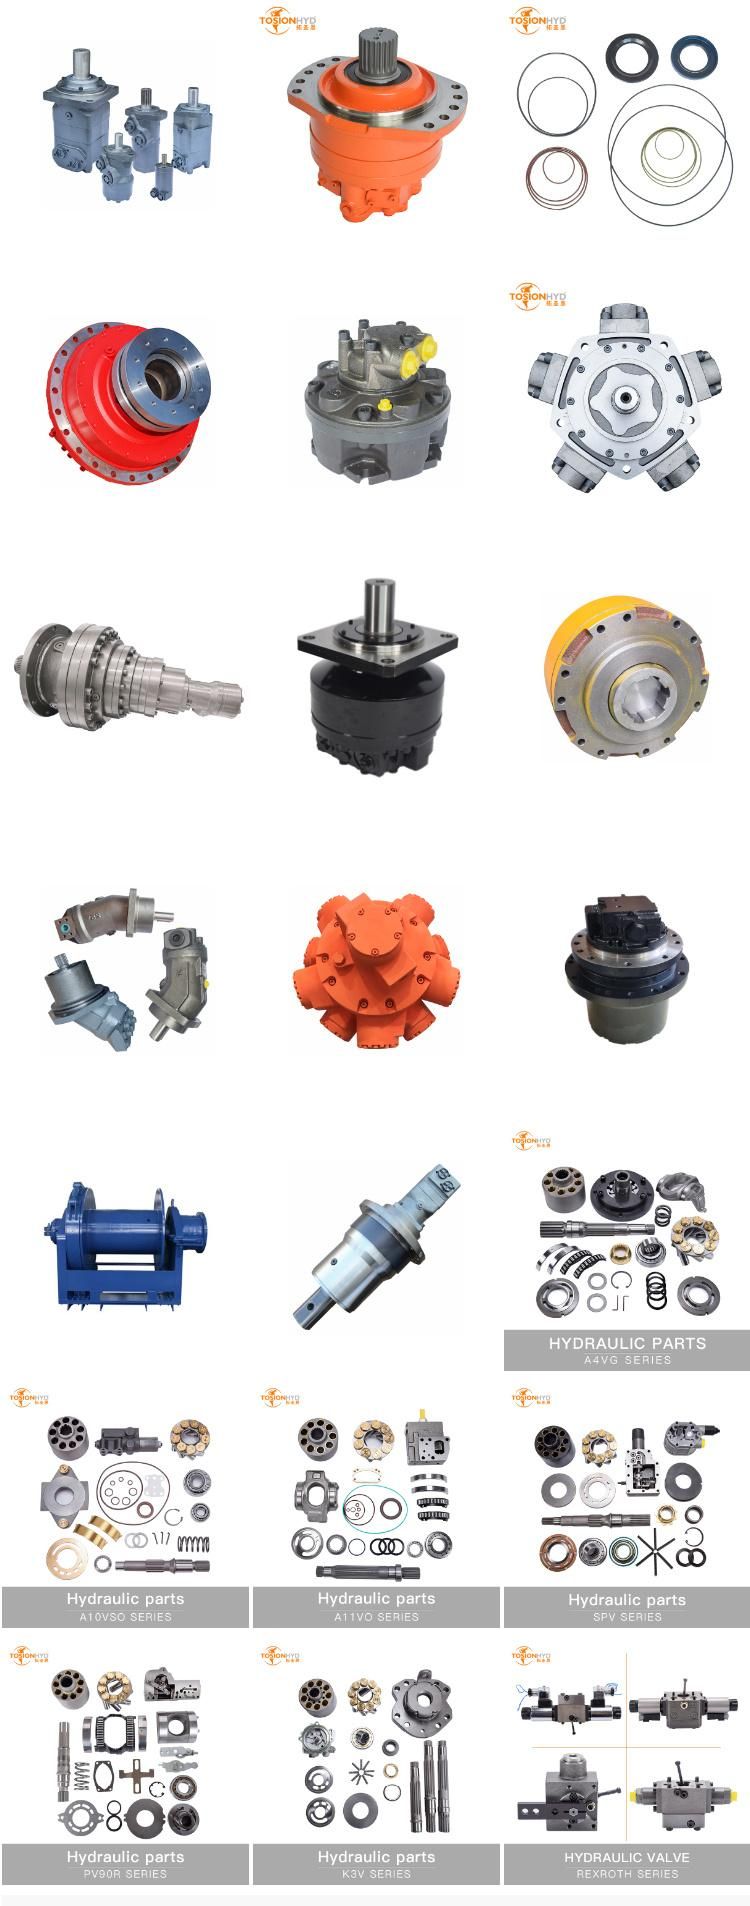 A2FM 500 Hydraulic Motor Parts with Rexroth Spare Repair Kits